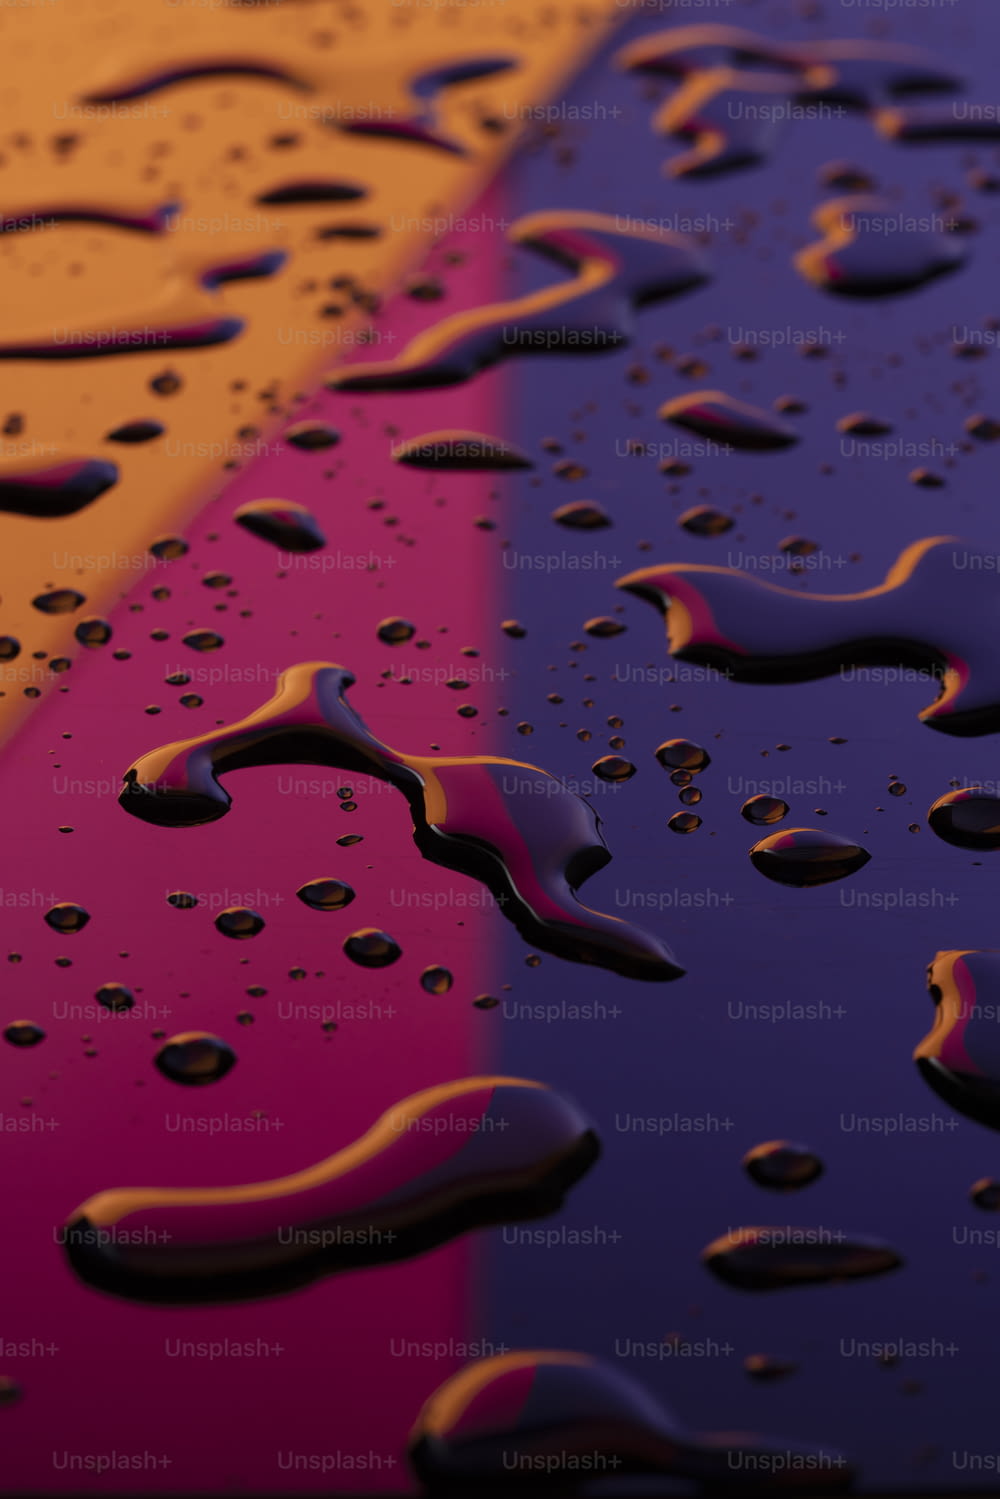 a close up of water droplets on a colorful surface